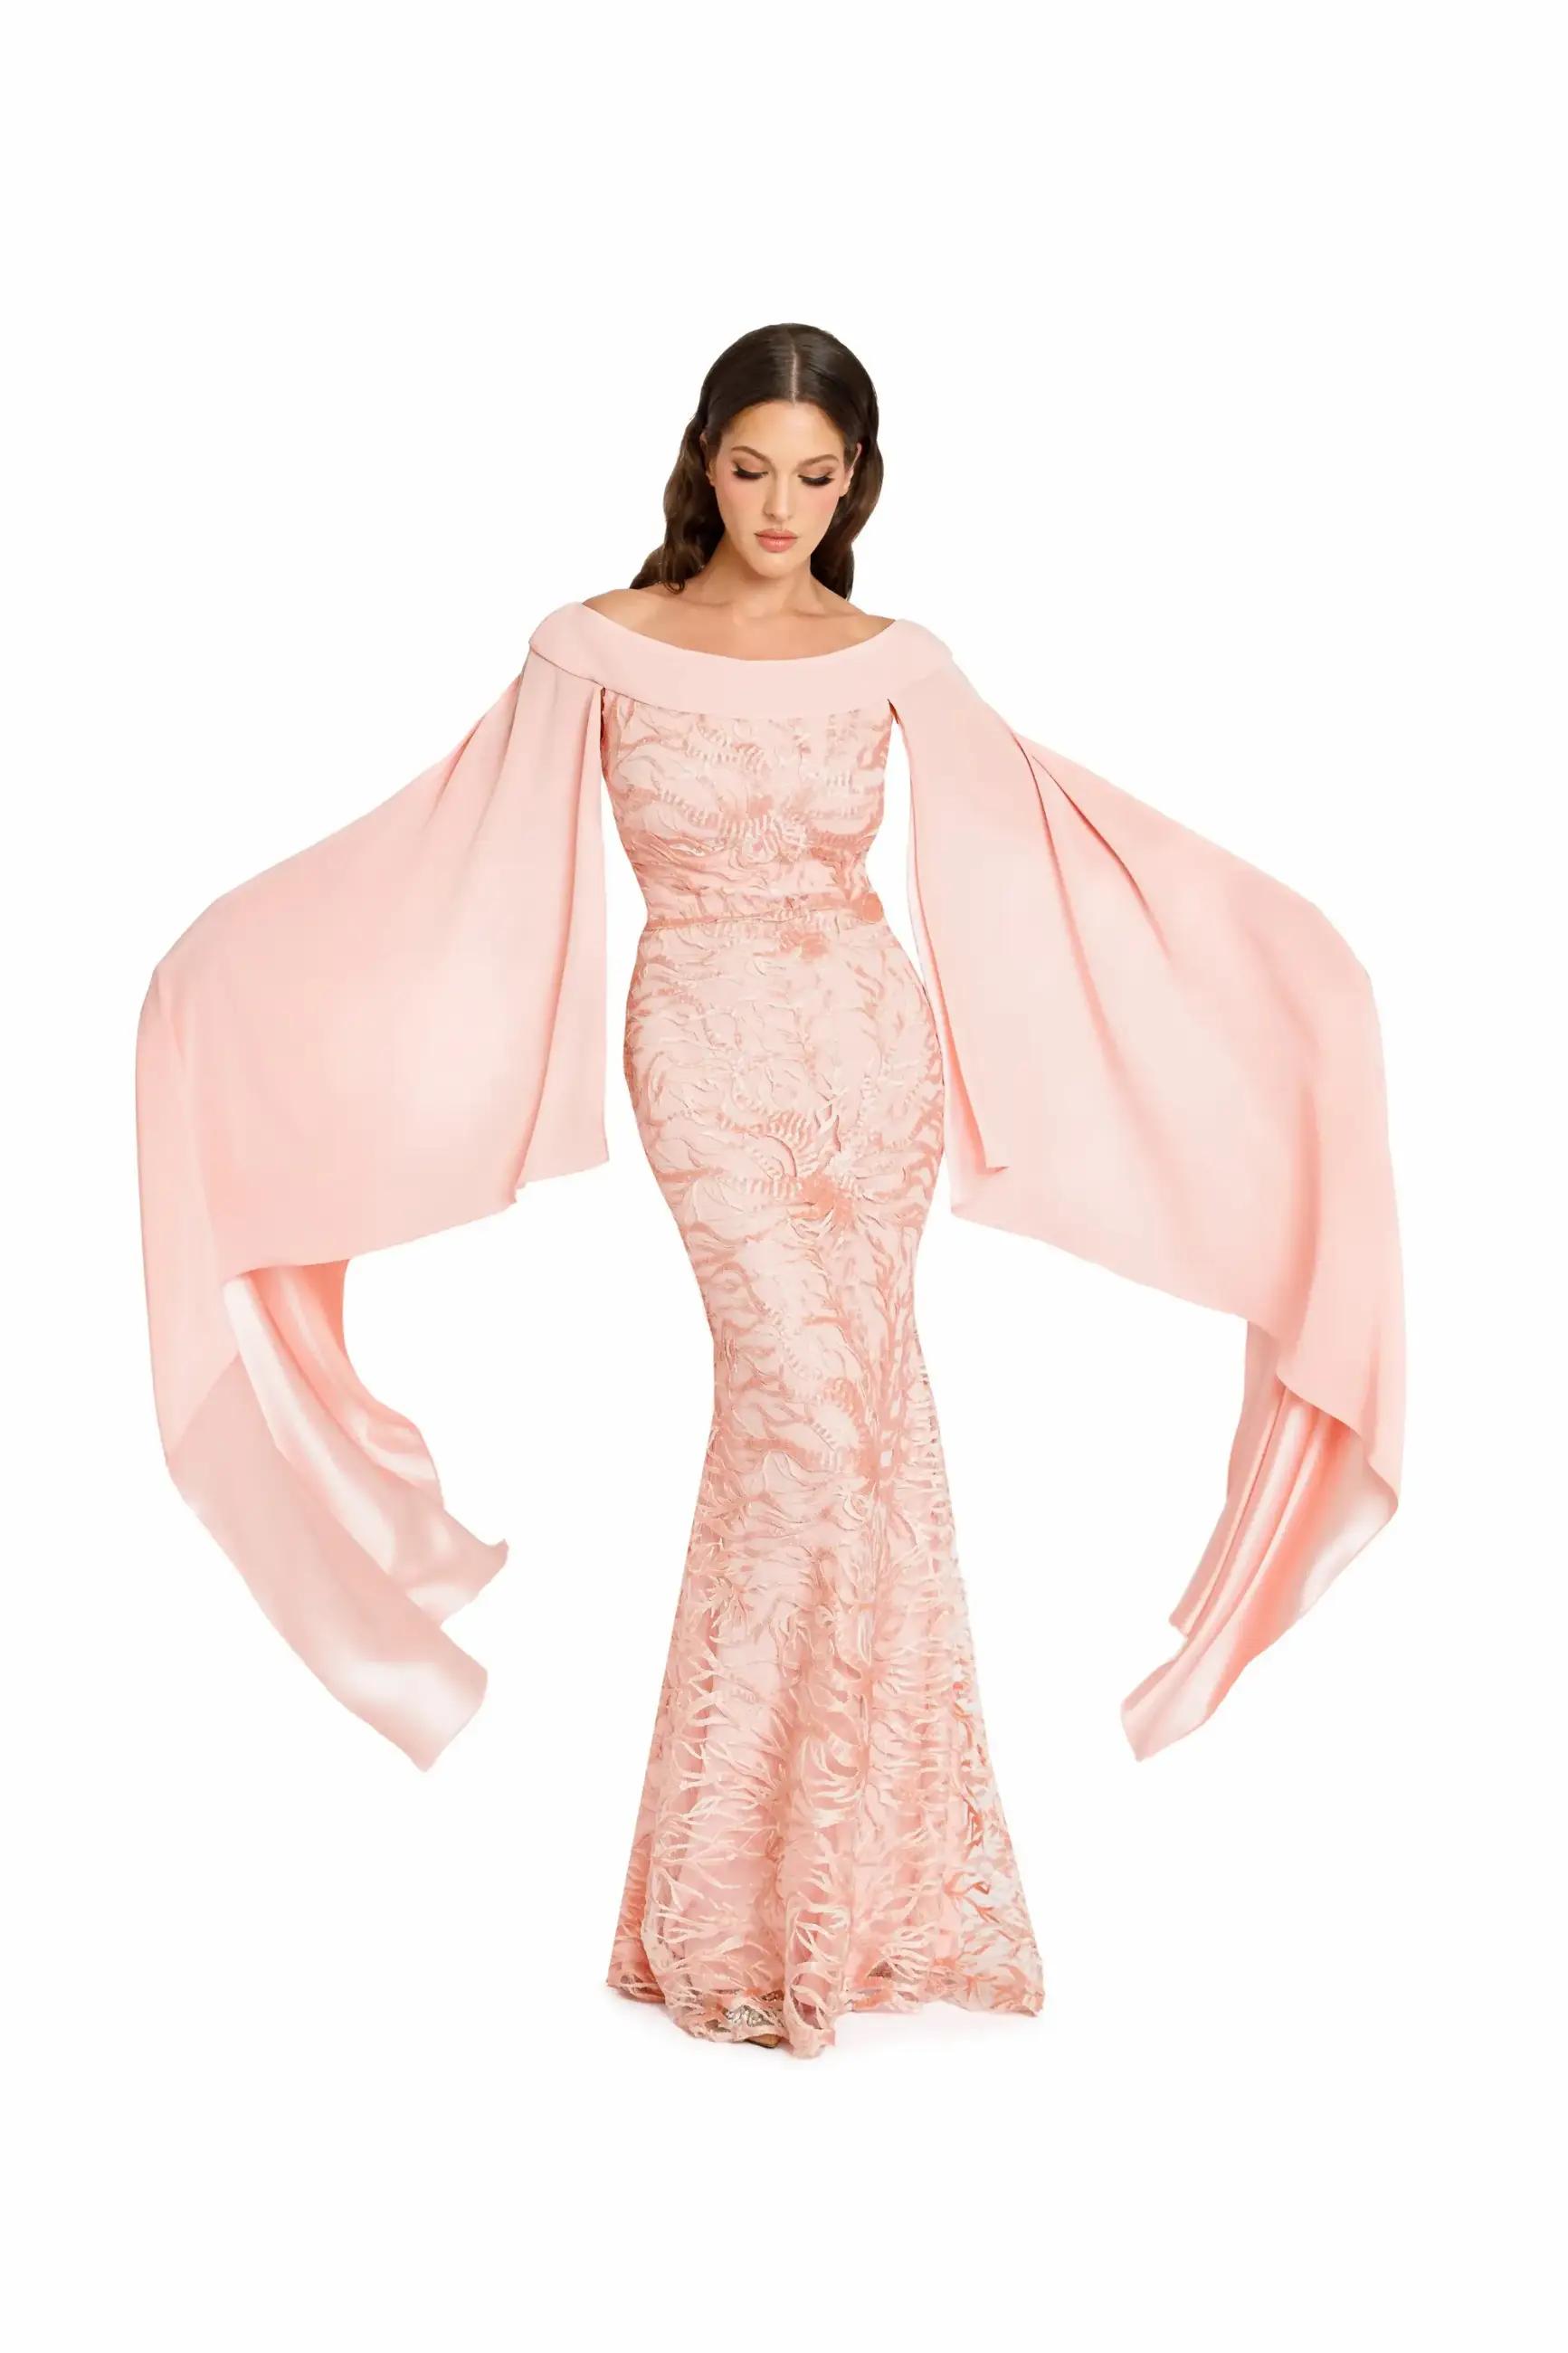 Model wearing a long pink evening gown